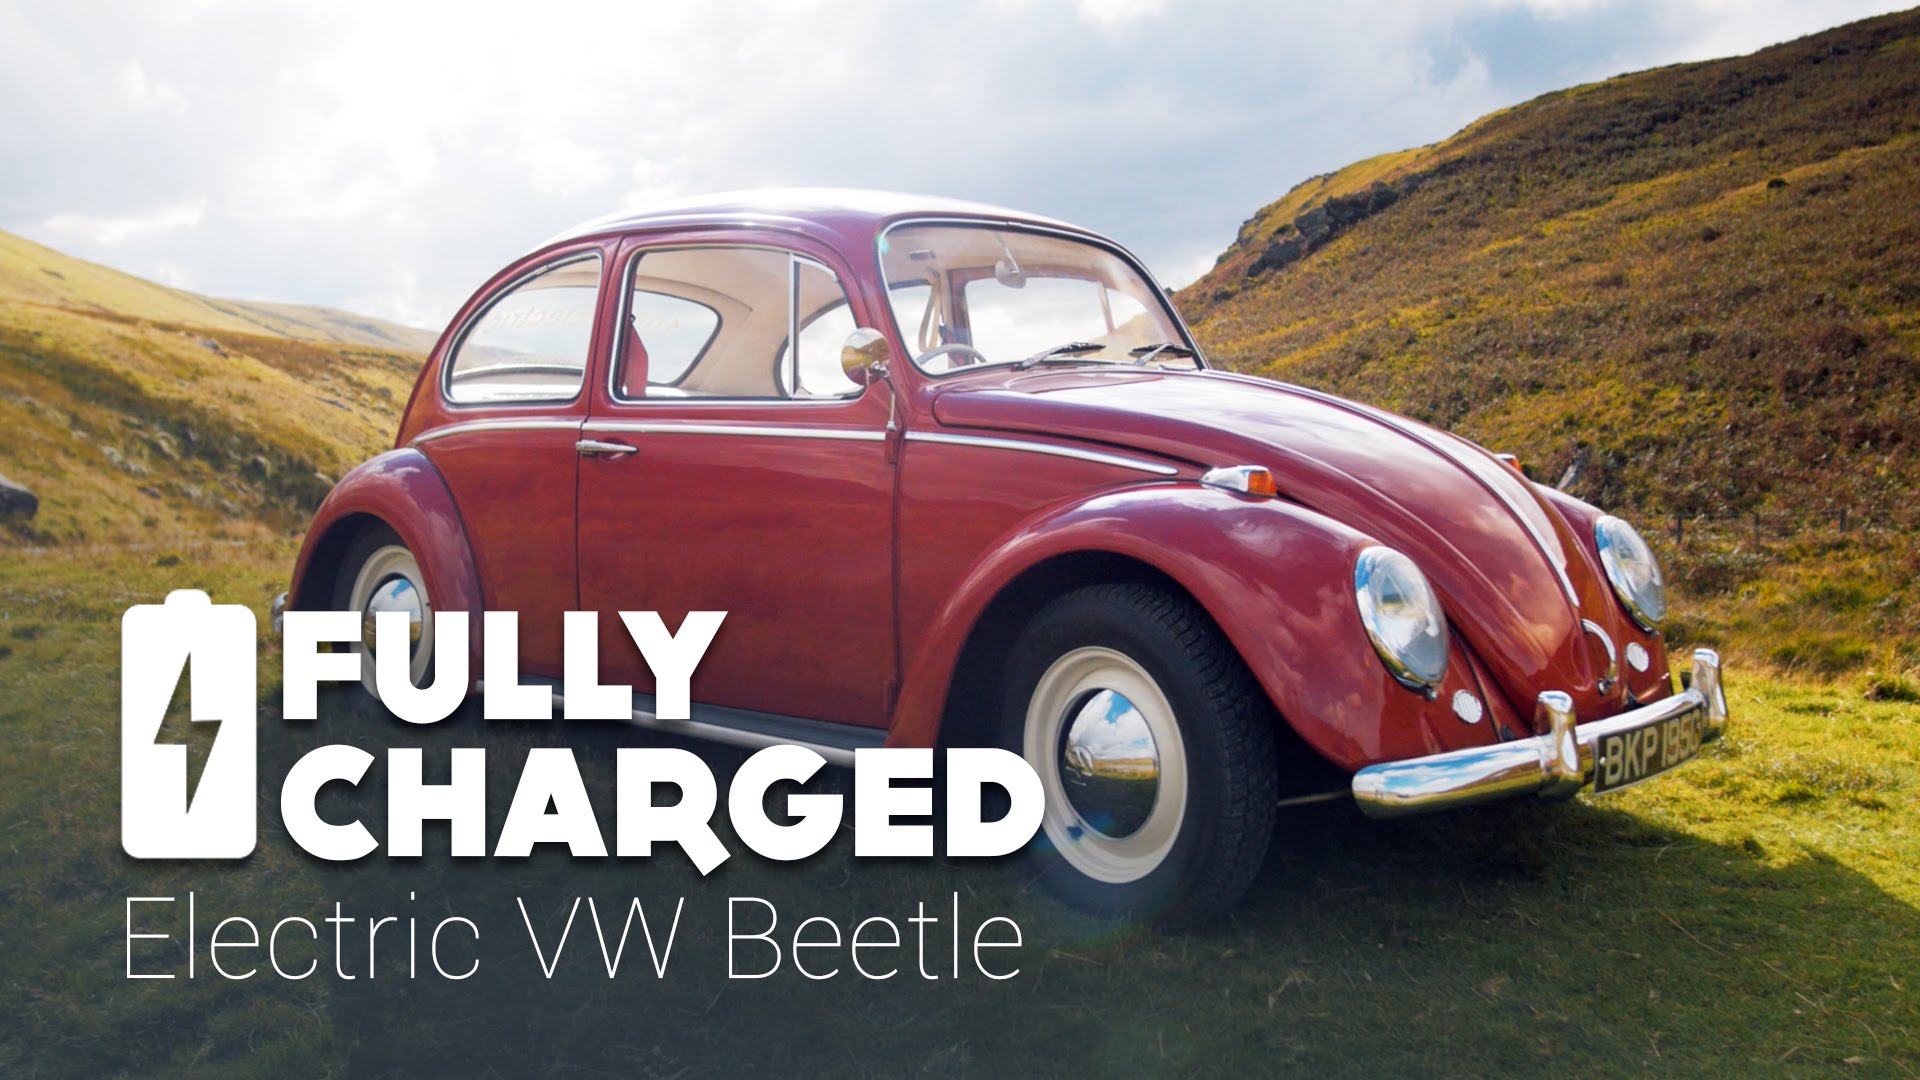 Electric VW Beetle | Fully Charged - YouTube